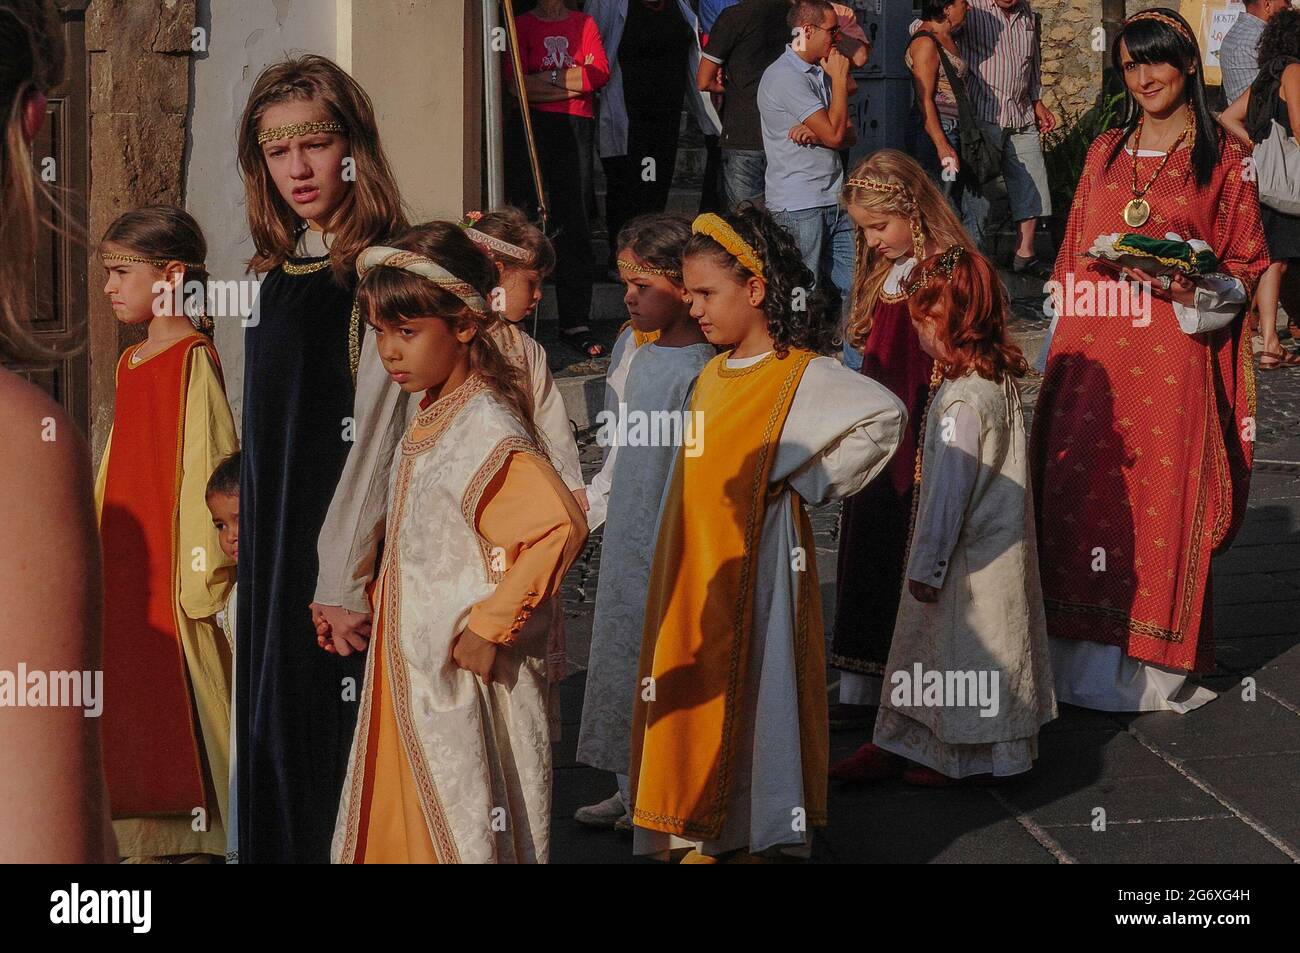 Female Costumes Historical High Resolution Stock Photography and Images -  Alamy